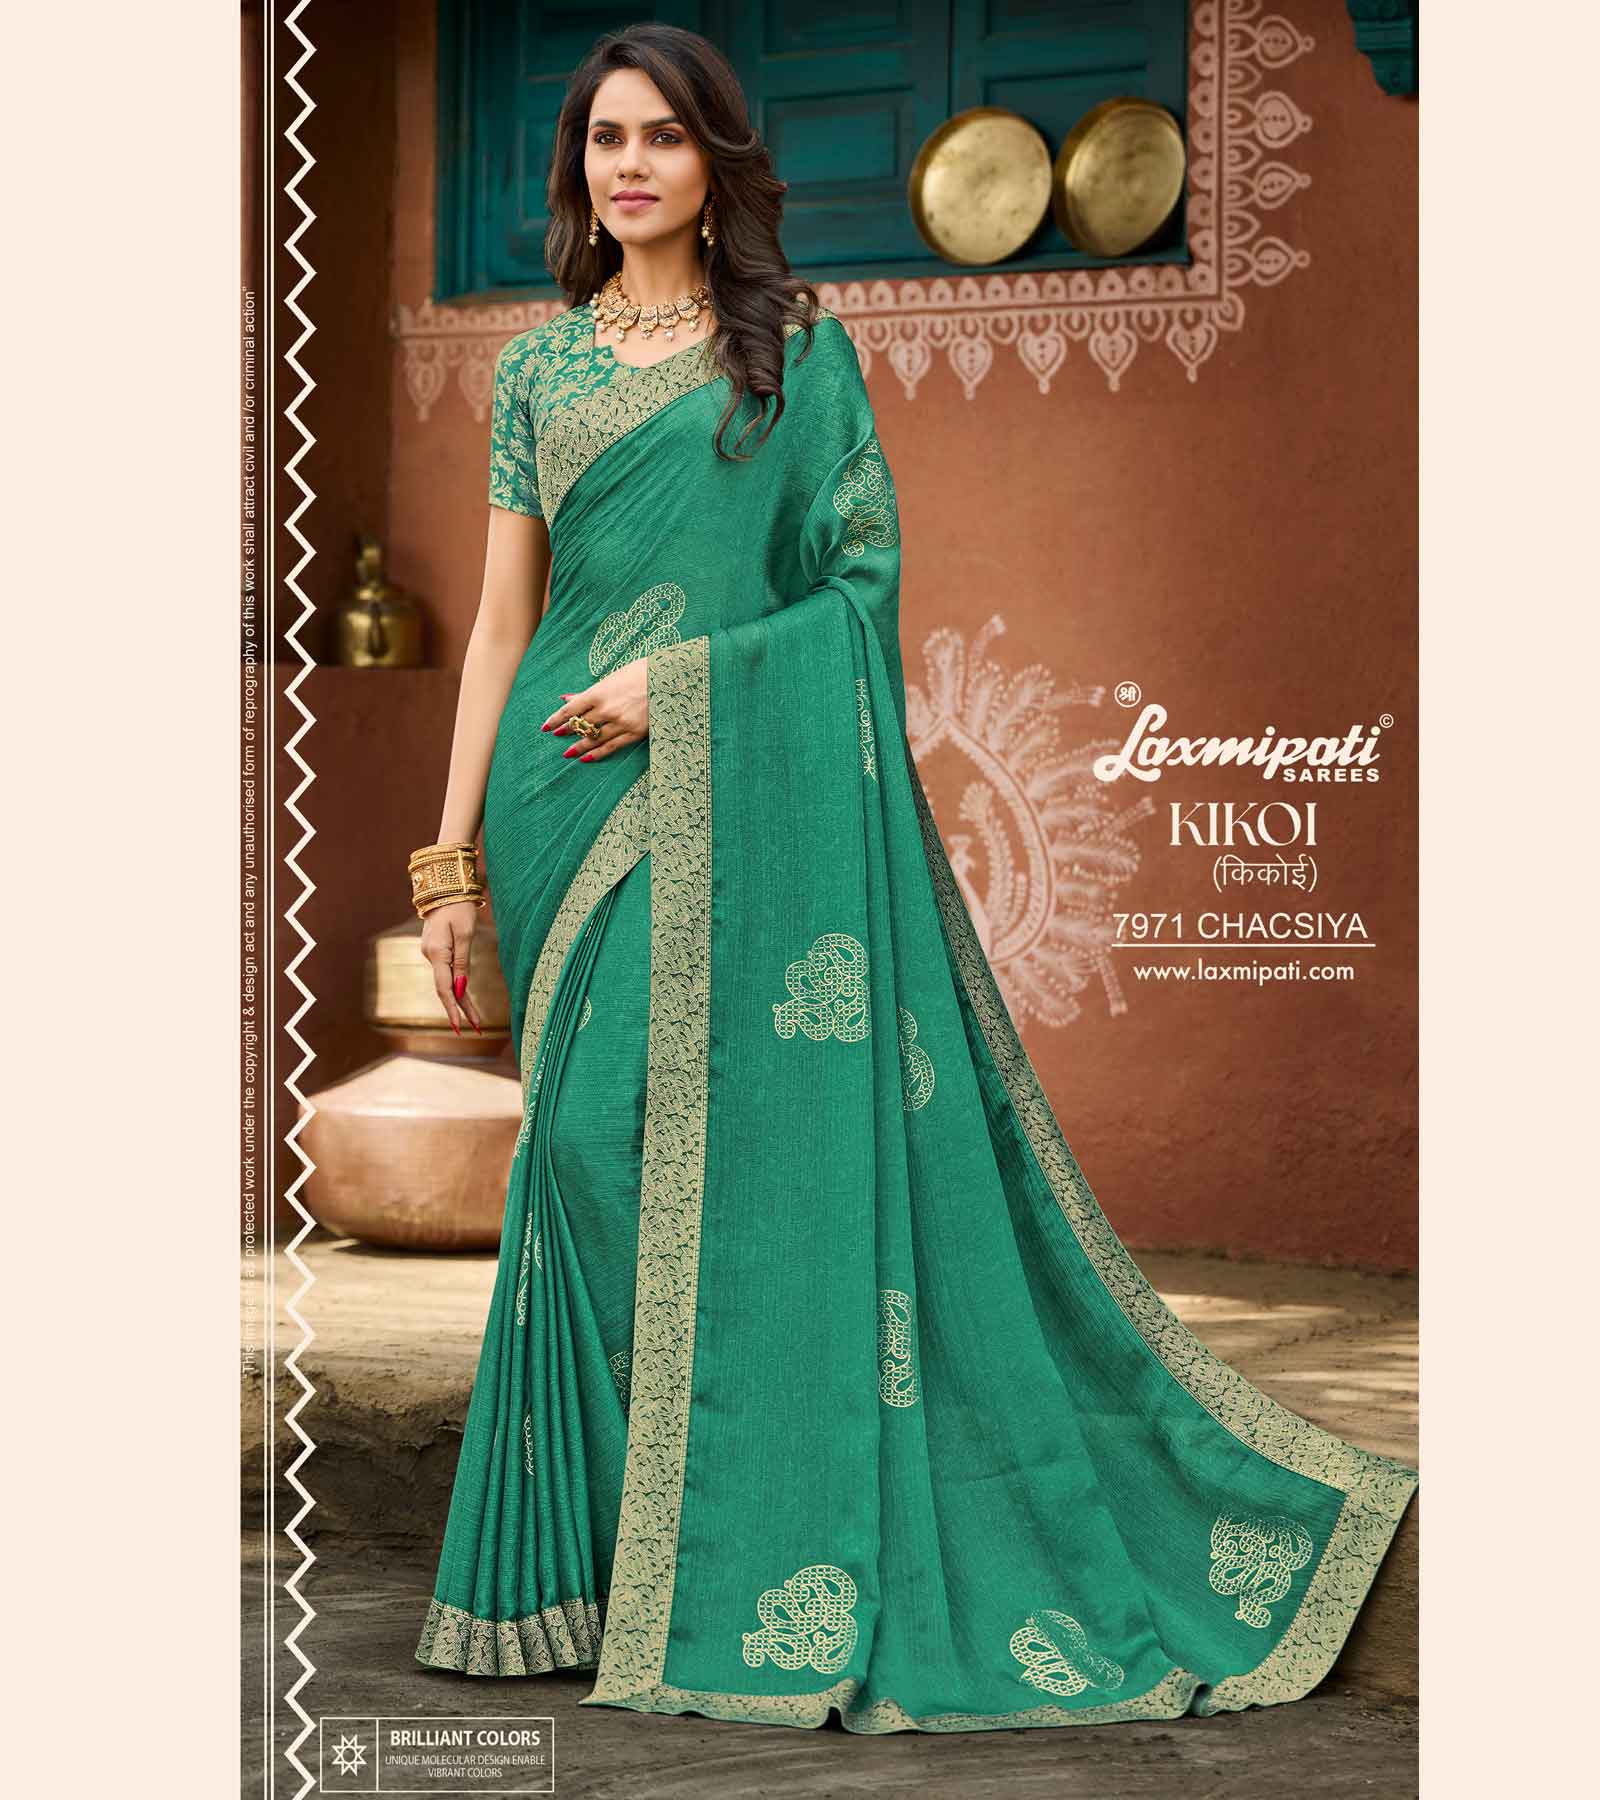 Image may contain: 1 person, standing and outdoor | Indian gowns dresses,  Designer anarkali dresses, Indian saree dress